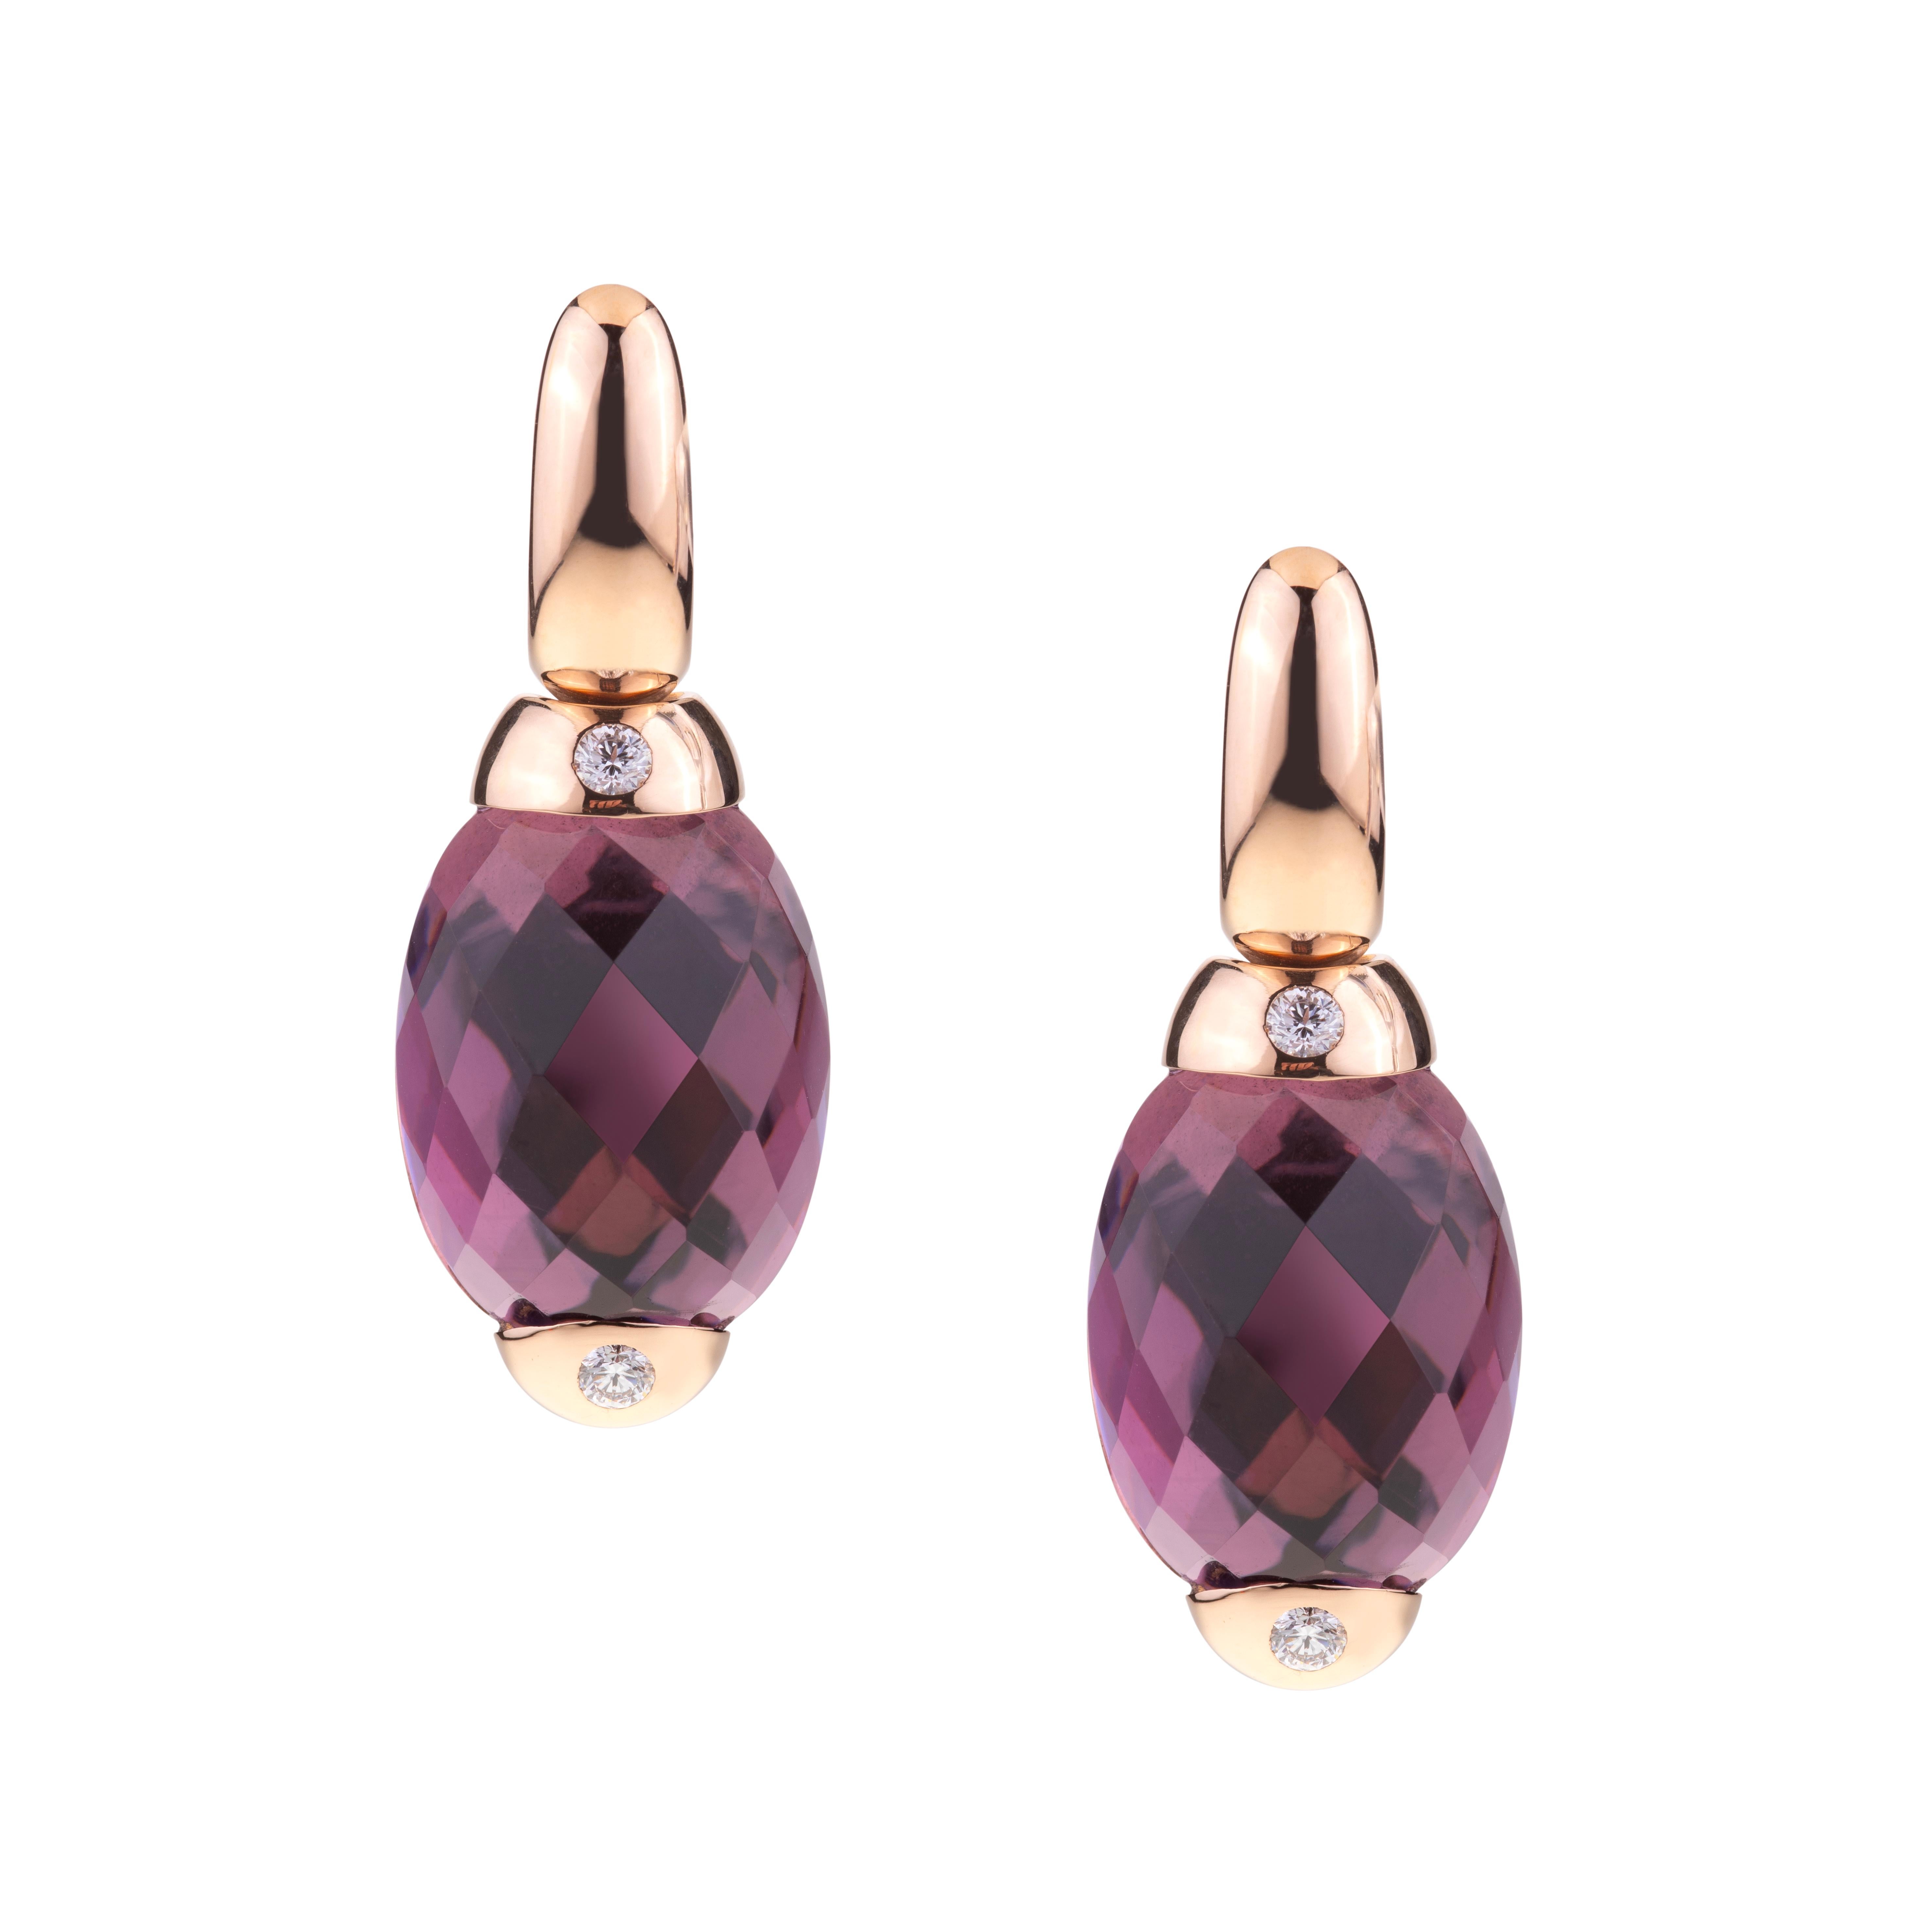 Briolette Cut Embrace Collection by Angeletti. Rose Gold Earrings With Amethyst and Diamonds For Sale